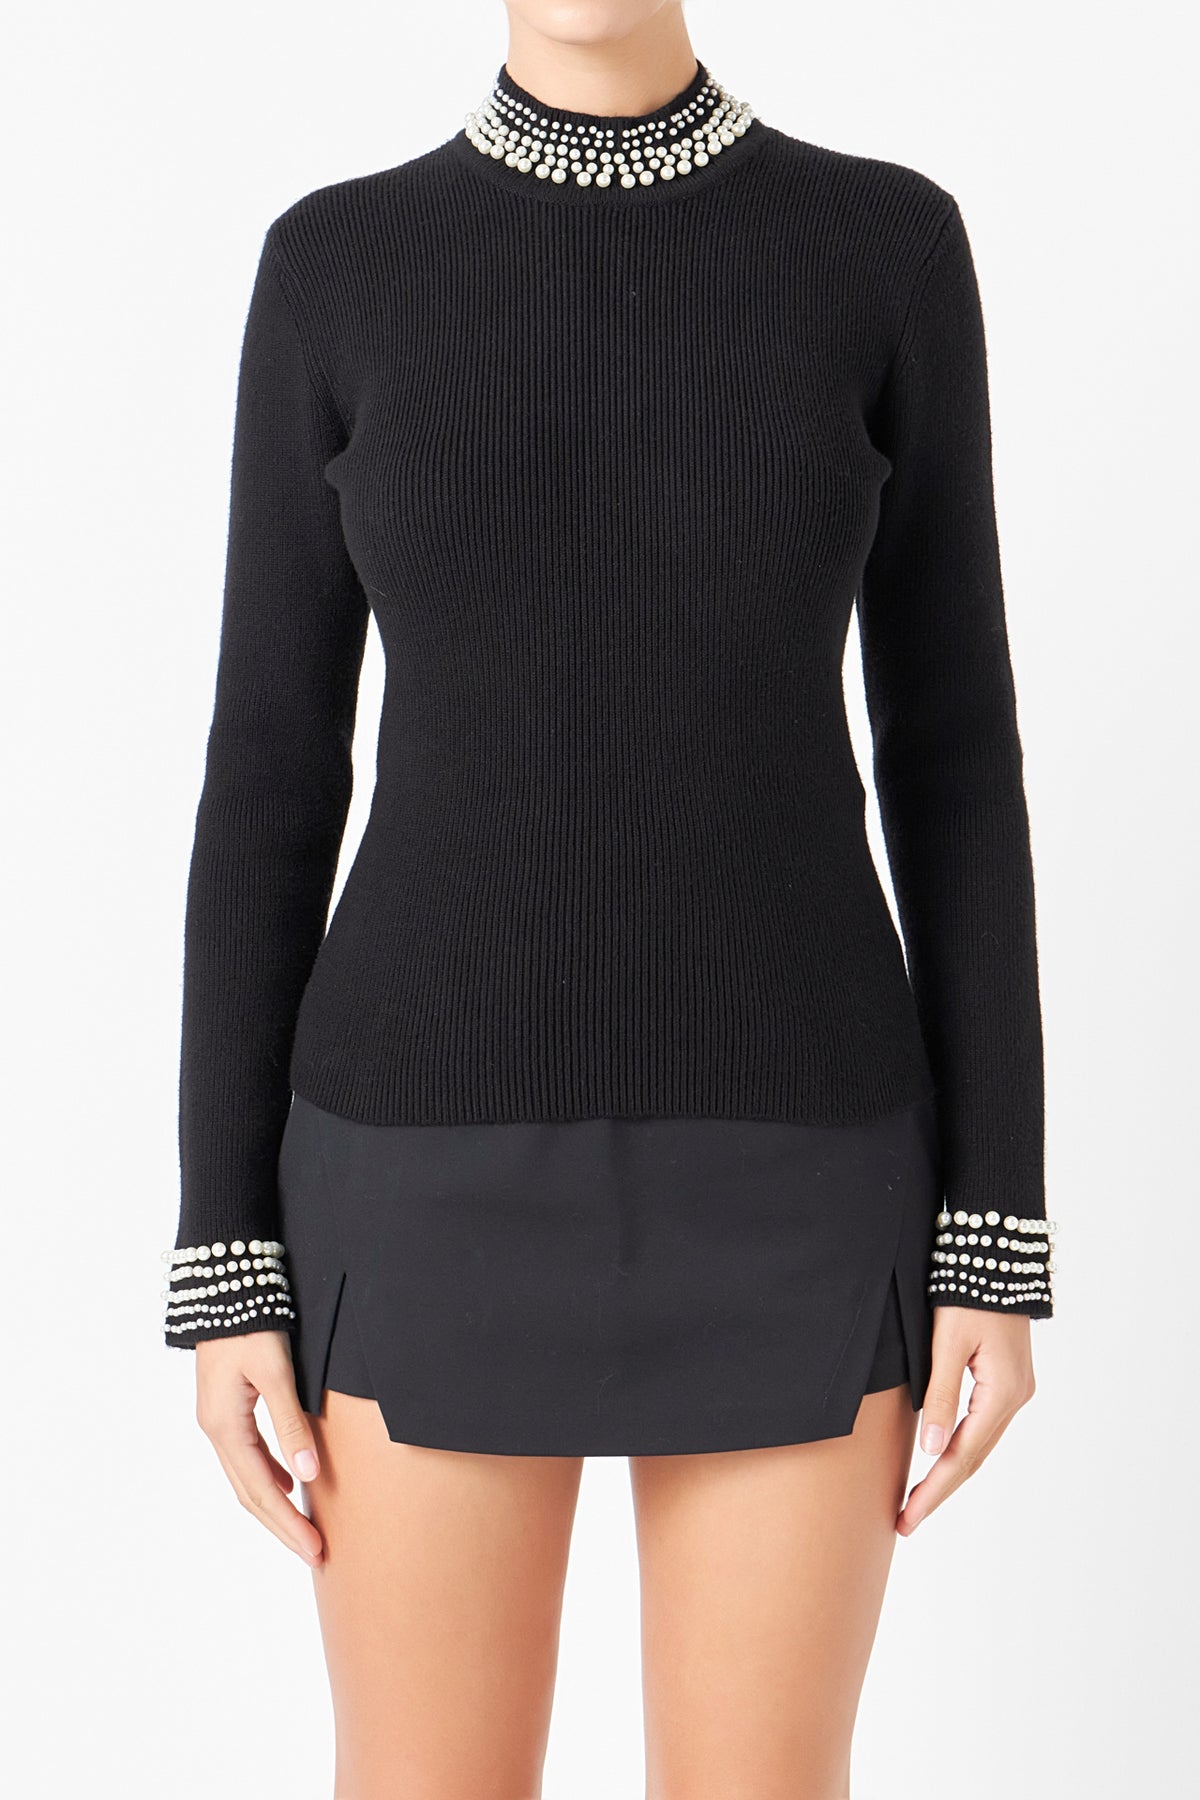 ENDLESS ROSE - Pearl Trimmed Sweater - SWEATERS & KNITS available at Objectrare